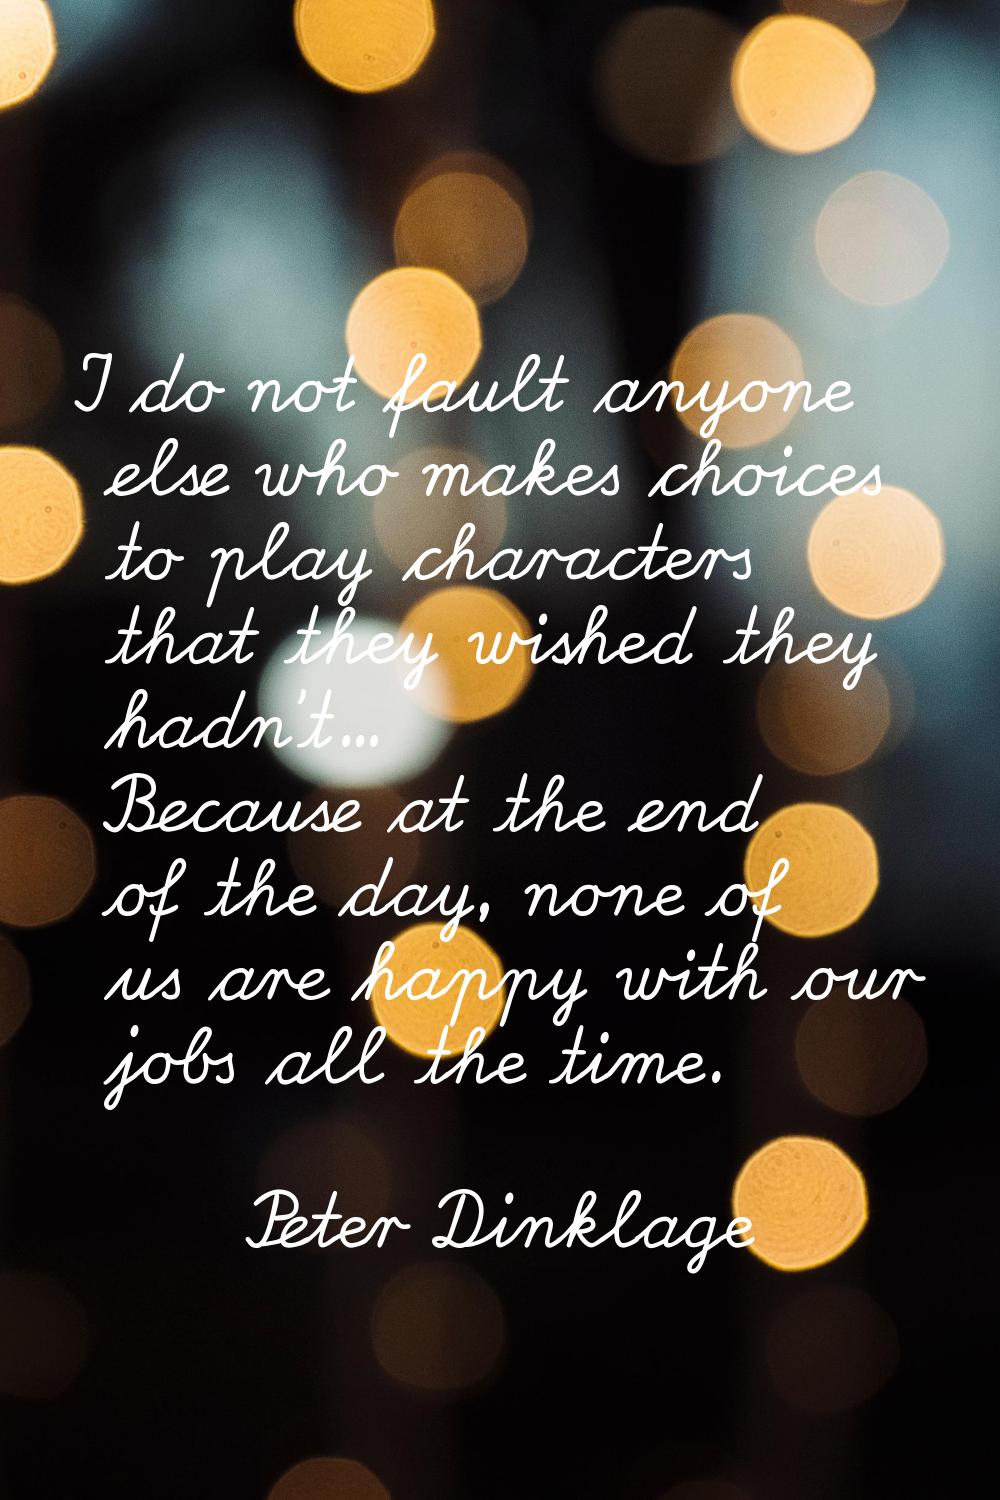 I do not fault anyone else who makes choices to play characters that they wished they hadn't... Bec